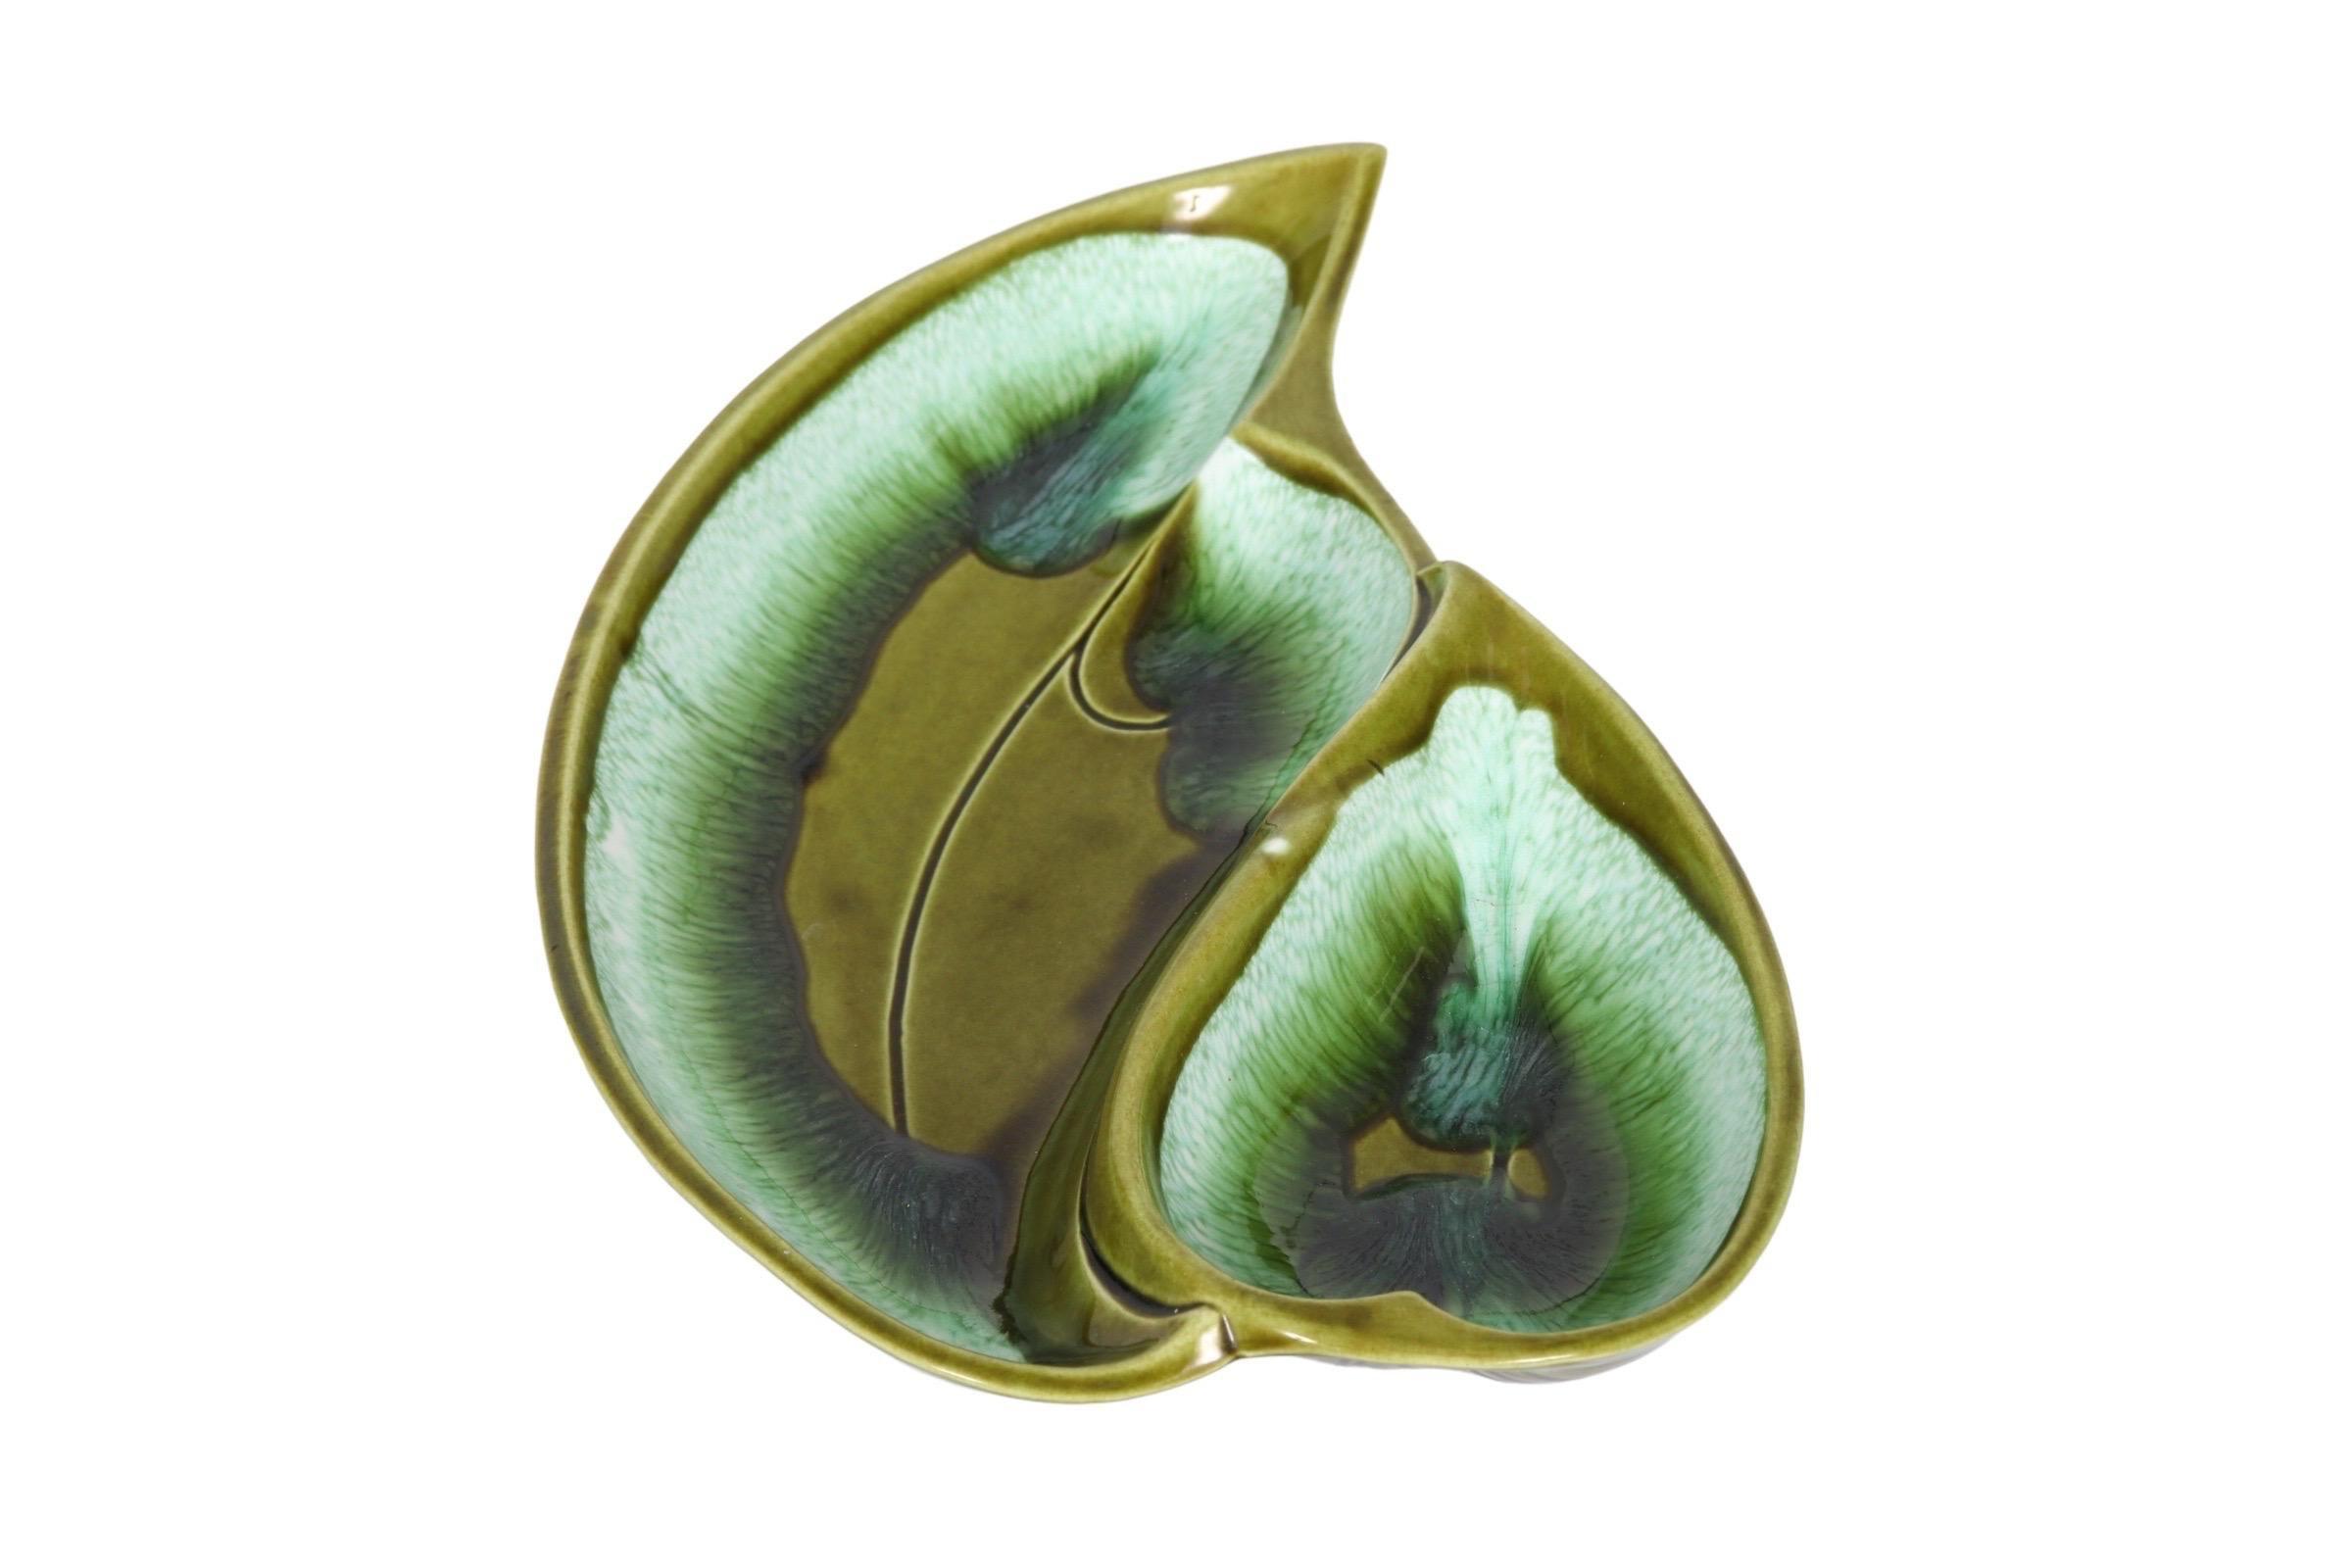 A Mid-Century Modern ceramic serving dish circa 1960, drip glazed in vibrant green hues and shaped like two adjacent leaves. Signed underneath “Santa Anita Ware R-17”.
 